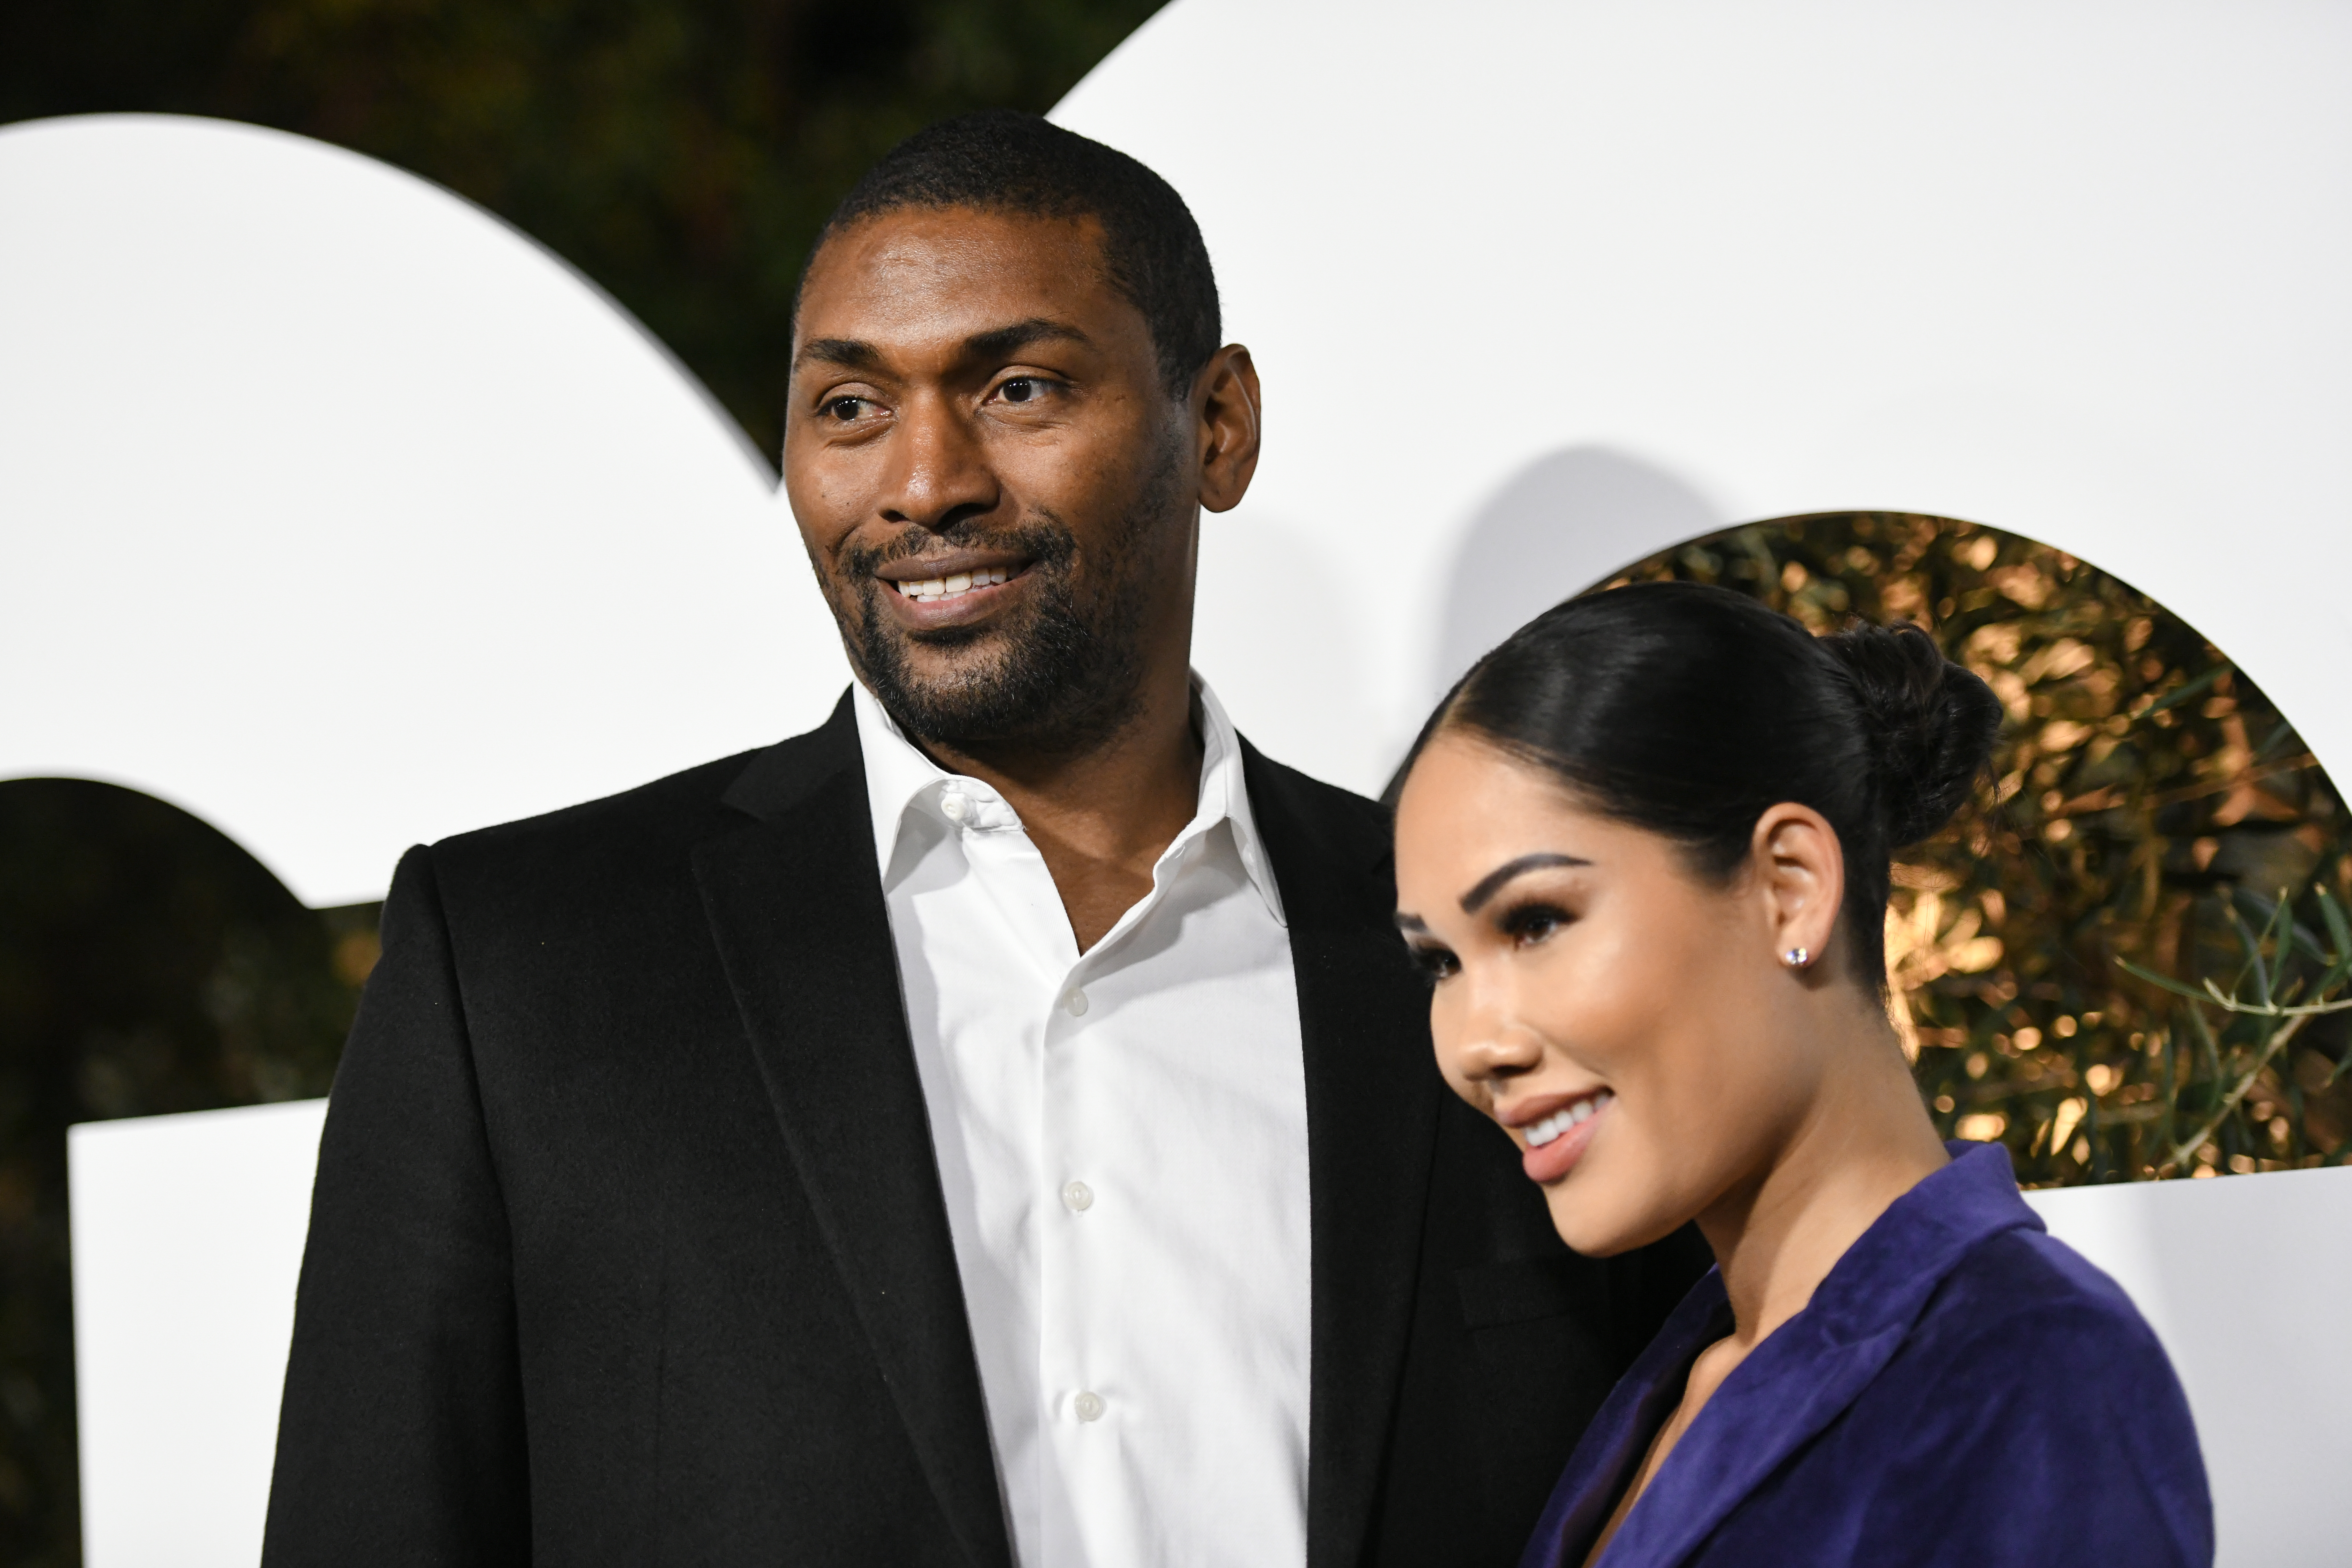 Ron Artest's petition to change name approved 